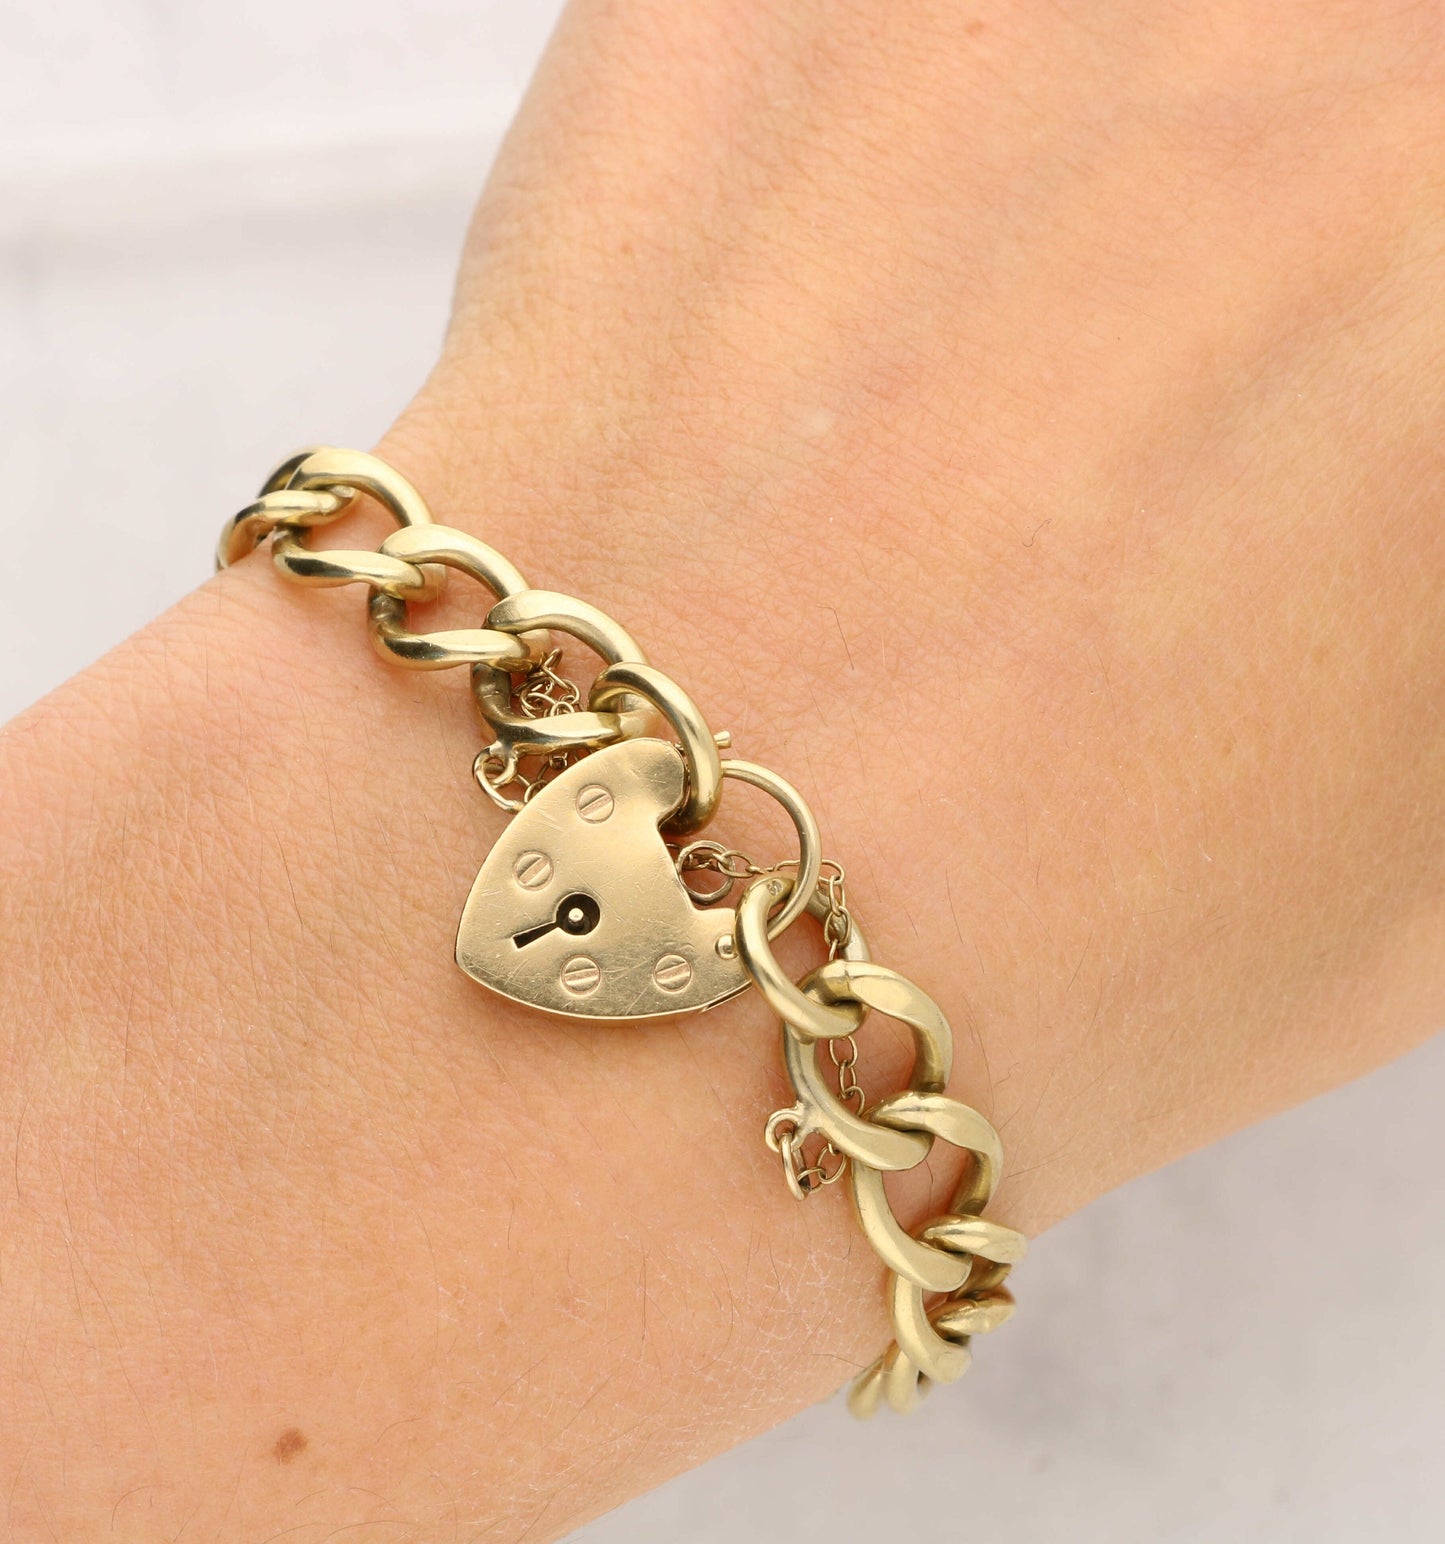 9ct gold curb bracelet with heart padlock.